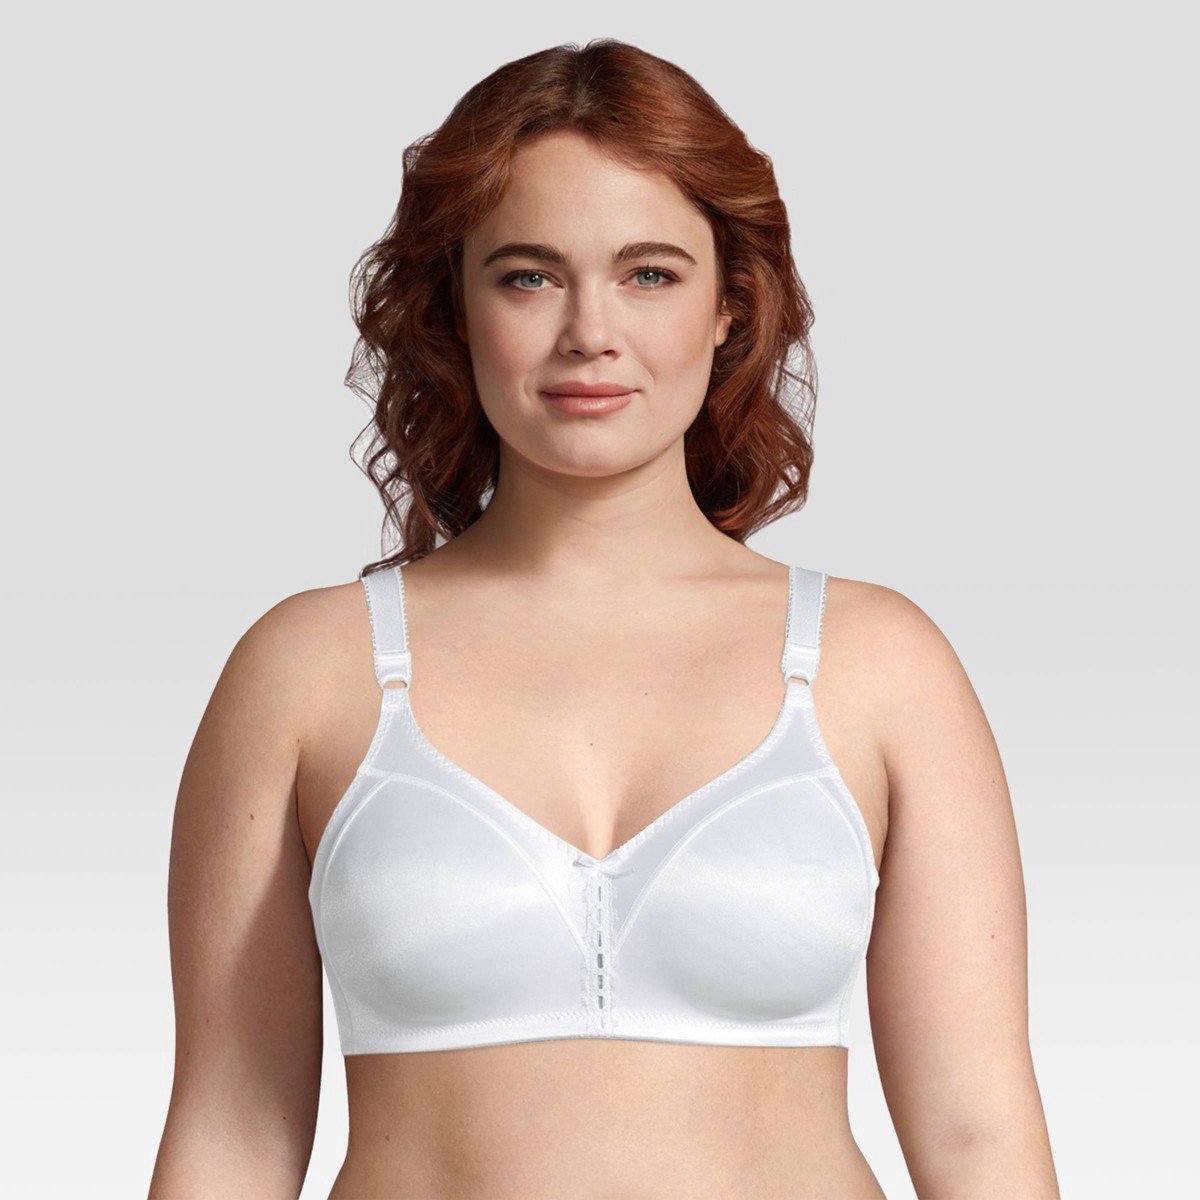 Beauty by Bali Women's Double Support Wirefree Bra B820 42C White 1 ct